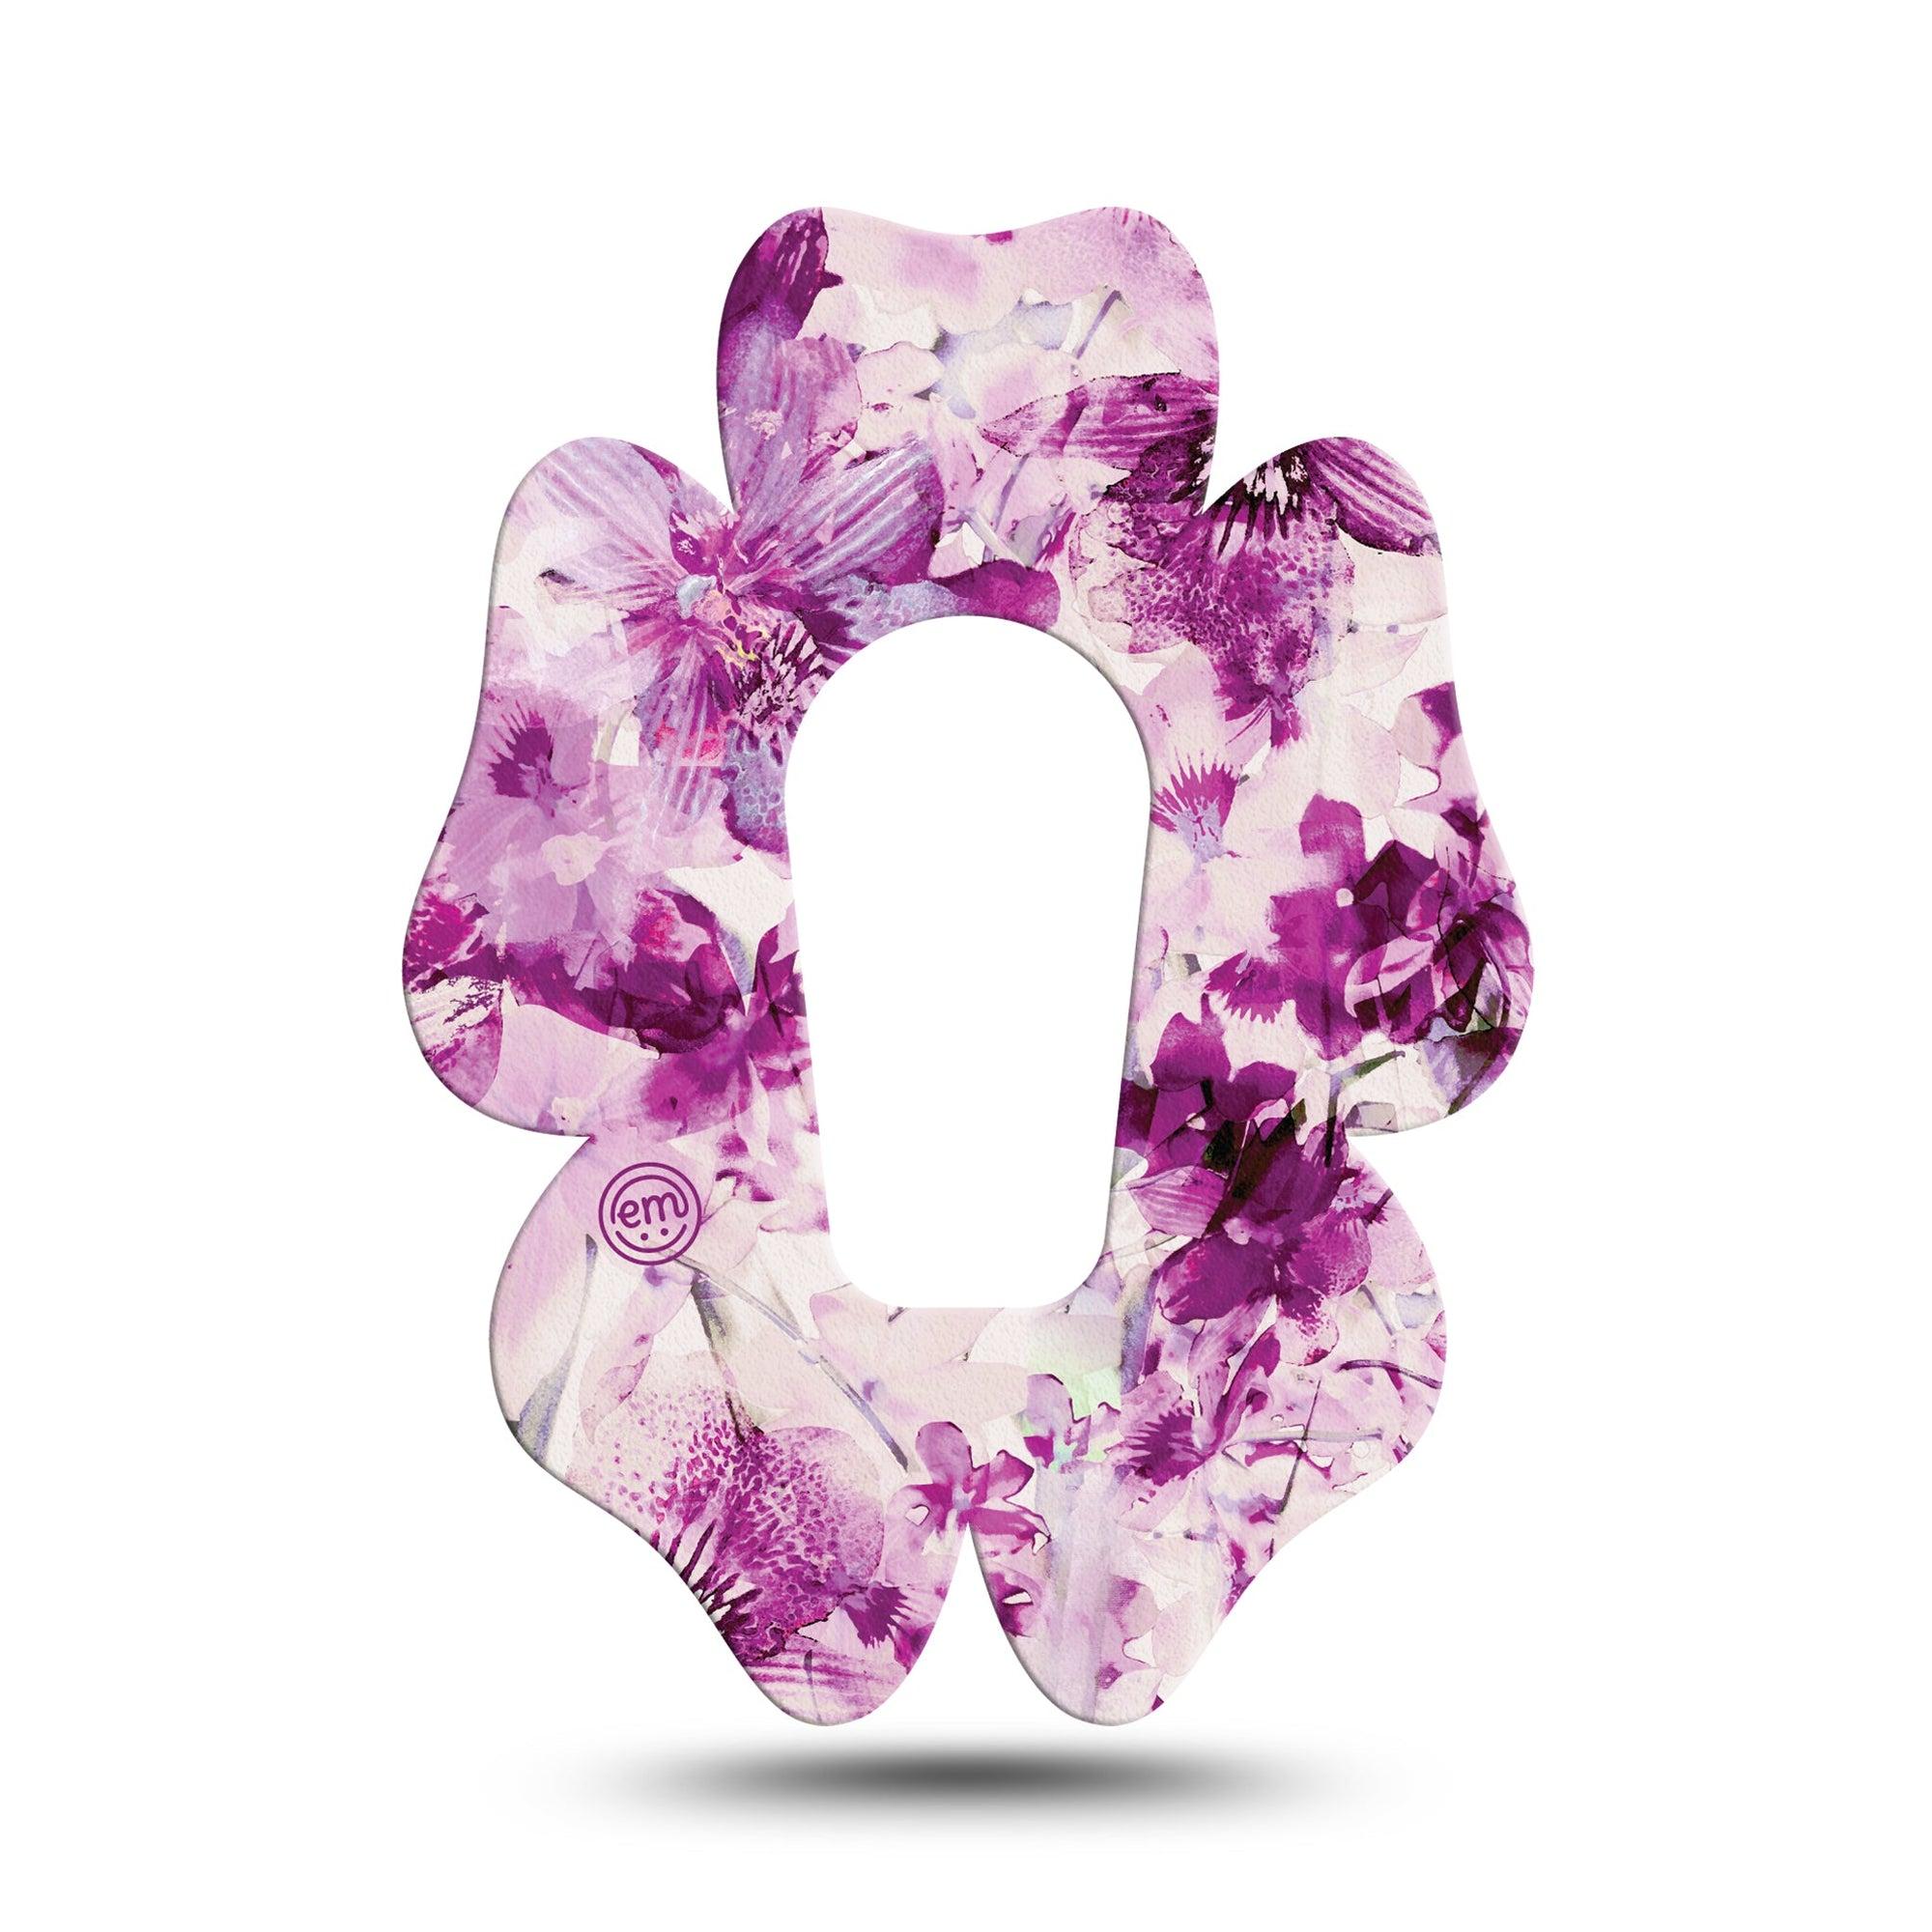 ExpressionMed Violet Orchids Flower Dexcom G6 Tape, Single, Violet Floral Silhouette Themed, CGM Overlay Patch Design